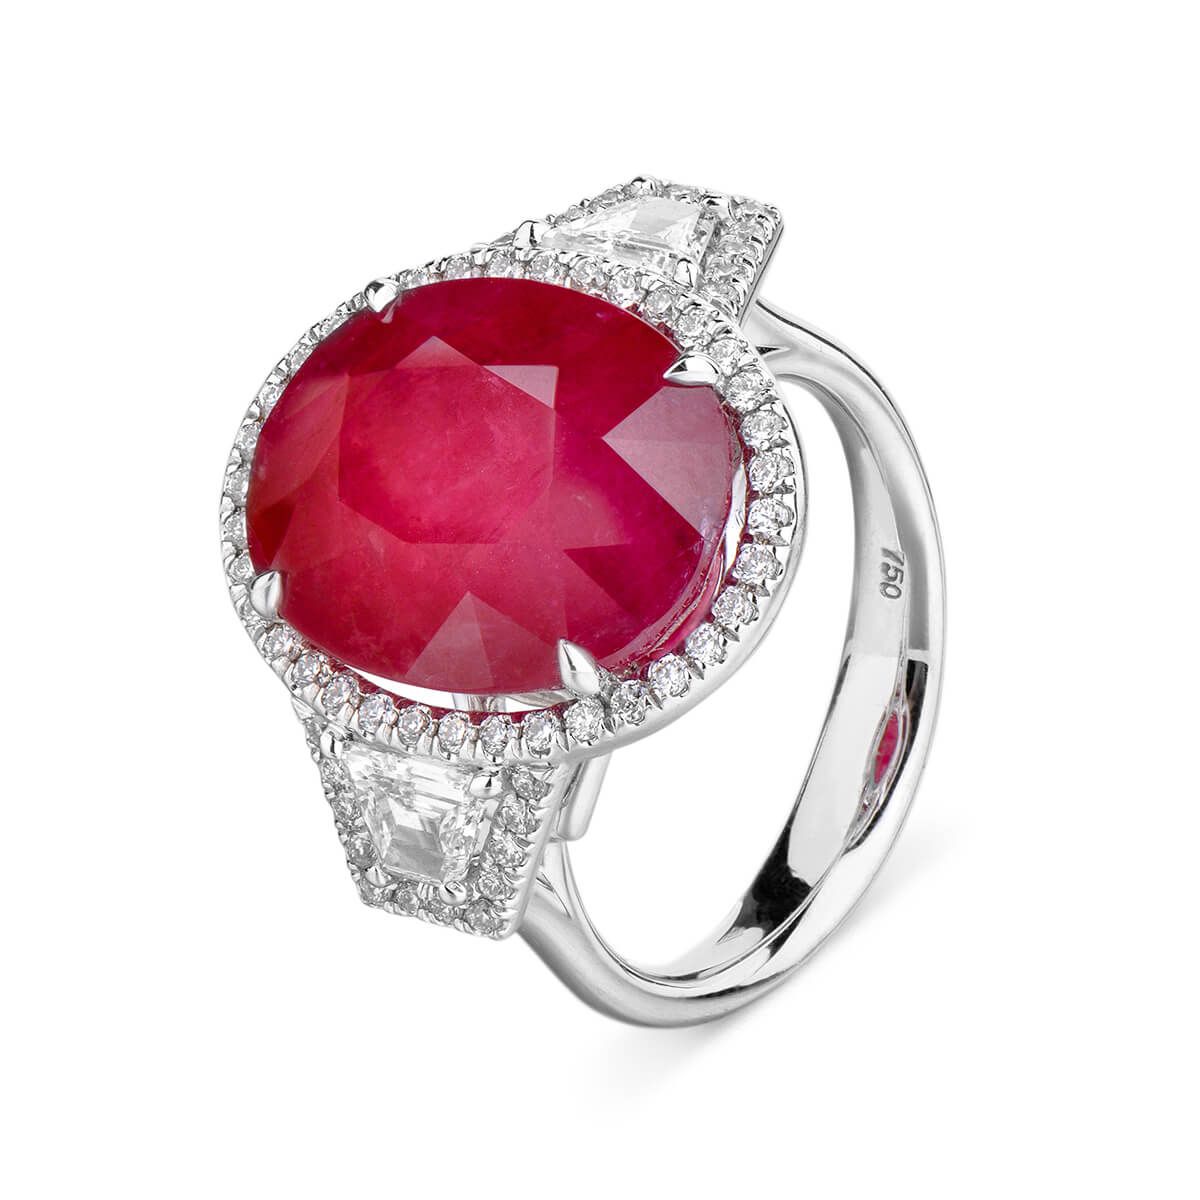 Natural Red Ruby Ring, 13.20 Ct. (14.50 Ct. TW), GRS Certified, GRS2016-027184, Unheated